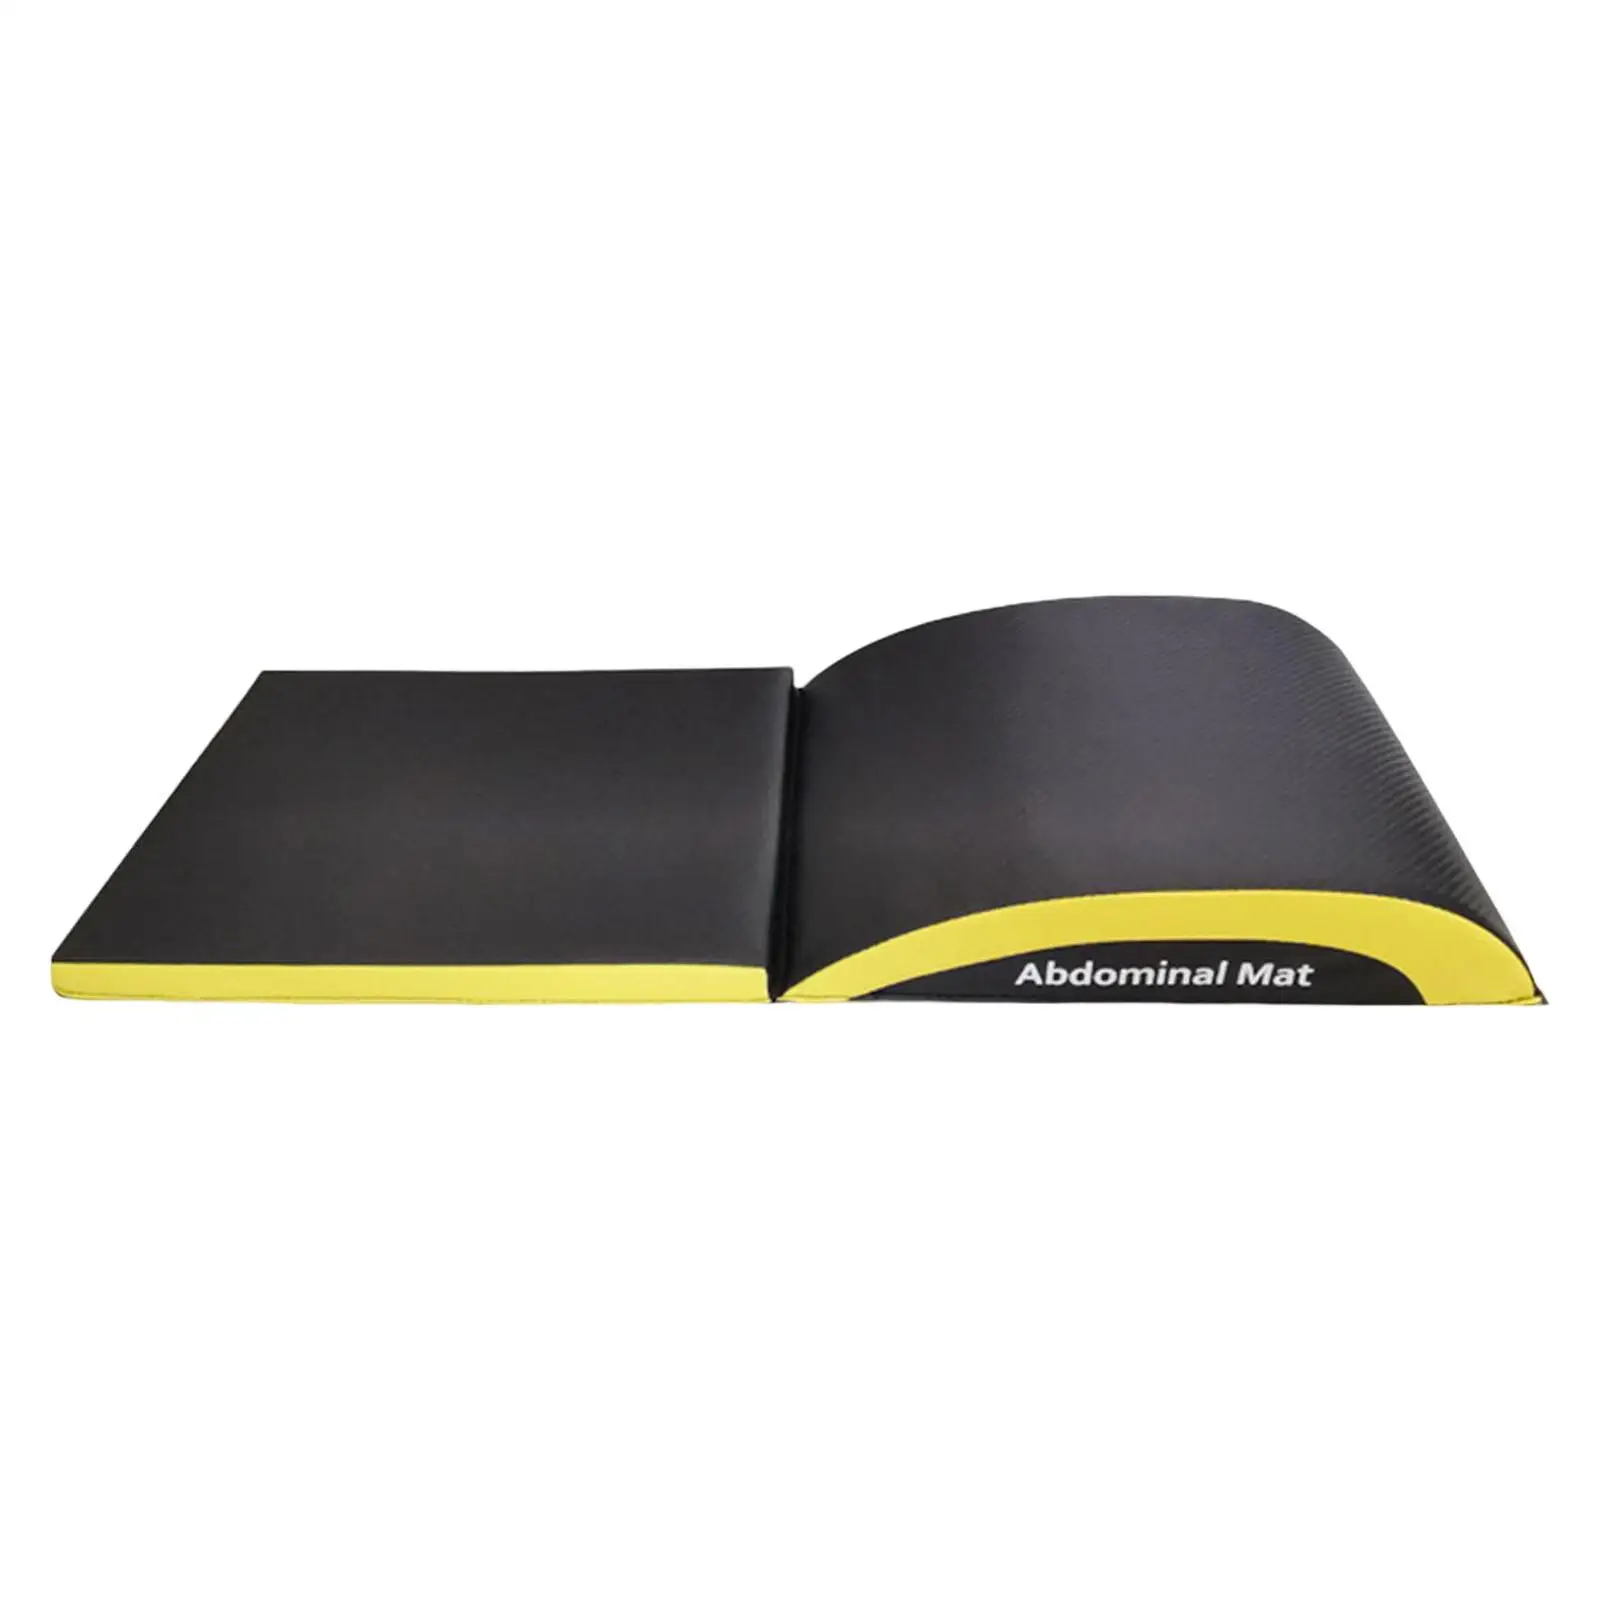 Folded Ab Exercise Mat Abdominal Core Trainer Pad Workouts Stretches Ab Muscles Situp Sit Exerciser Cushion